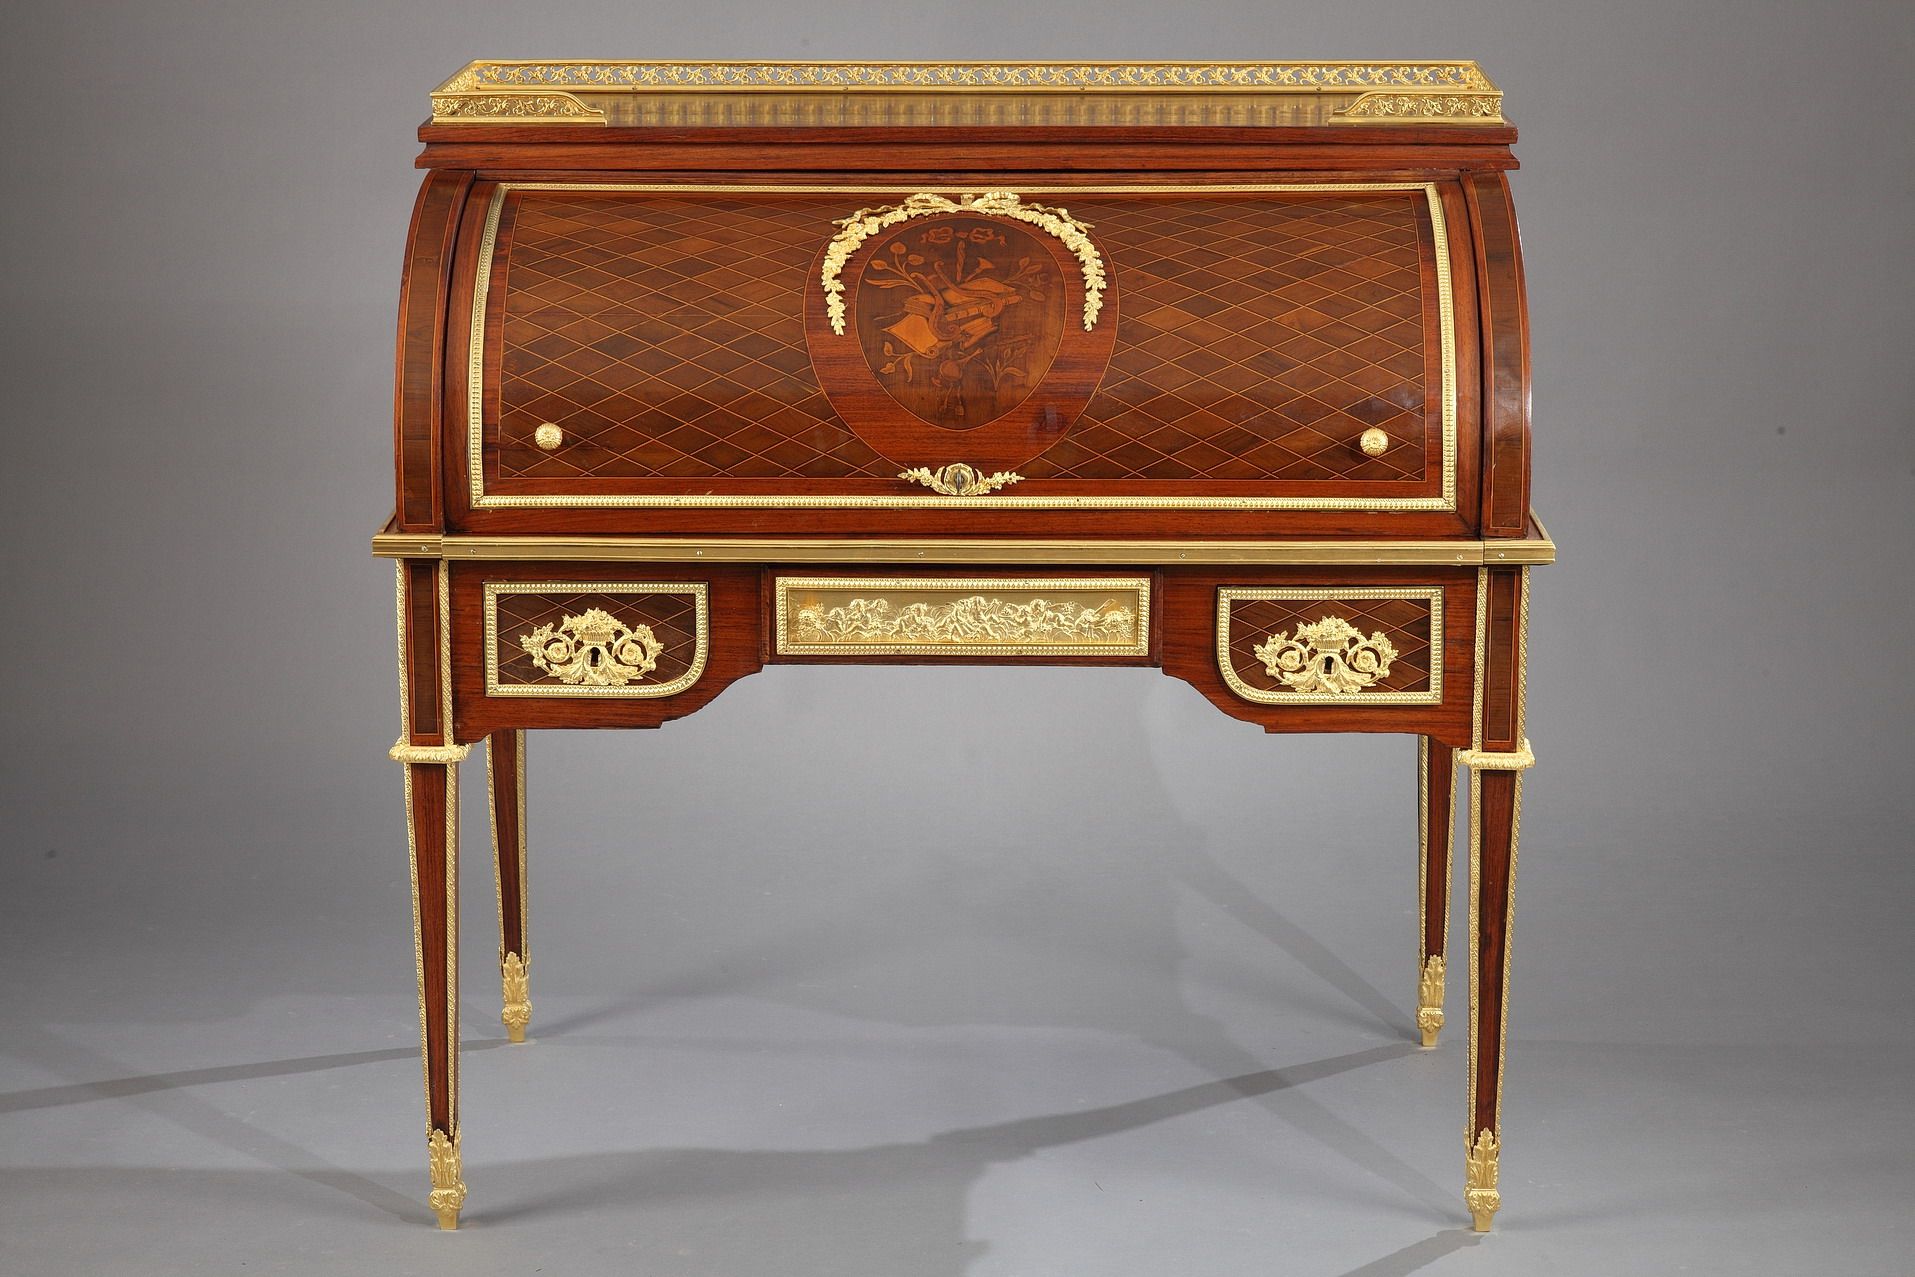 ROLLTOP DESK AFTER RIESNER ATTRIBUTED TO MAISON BEURDELEY